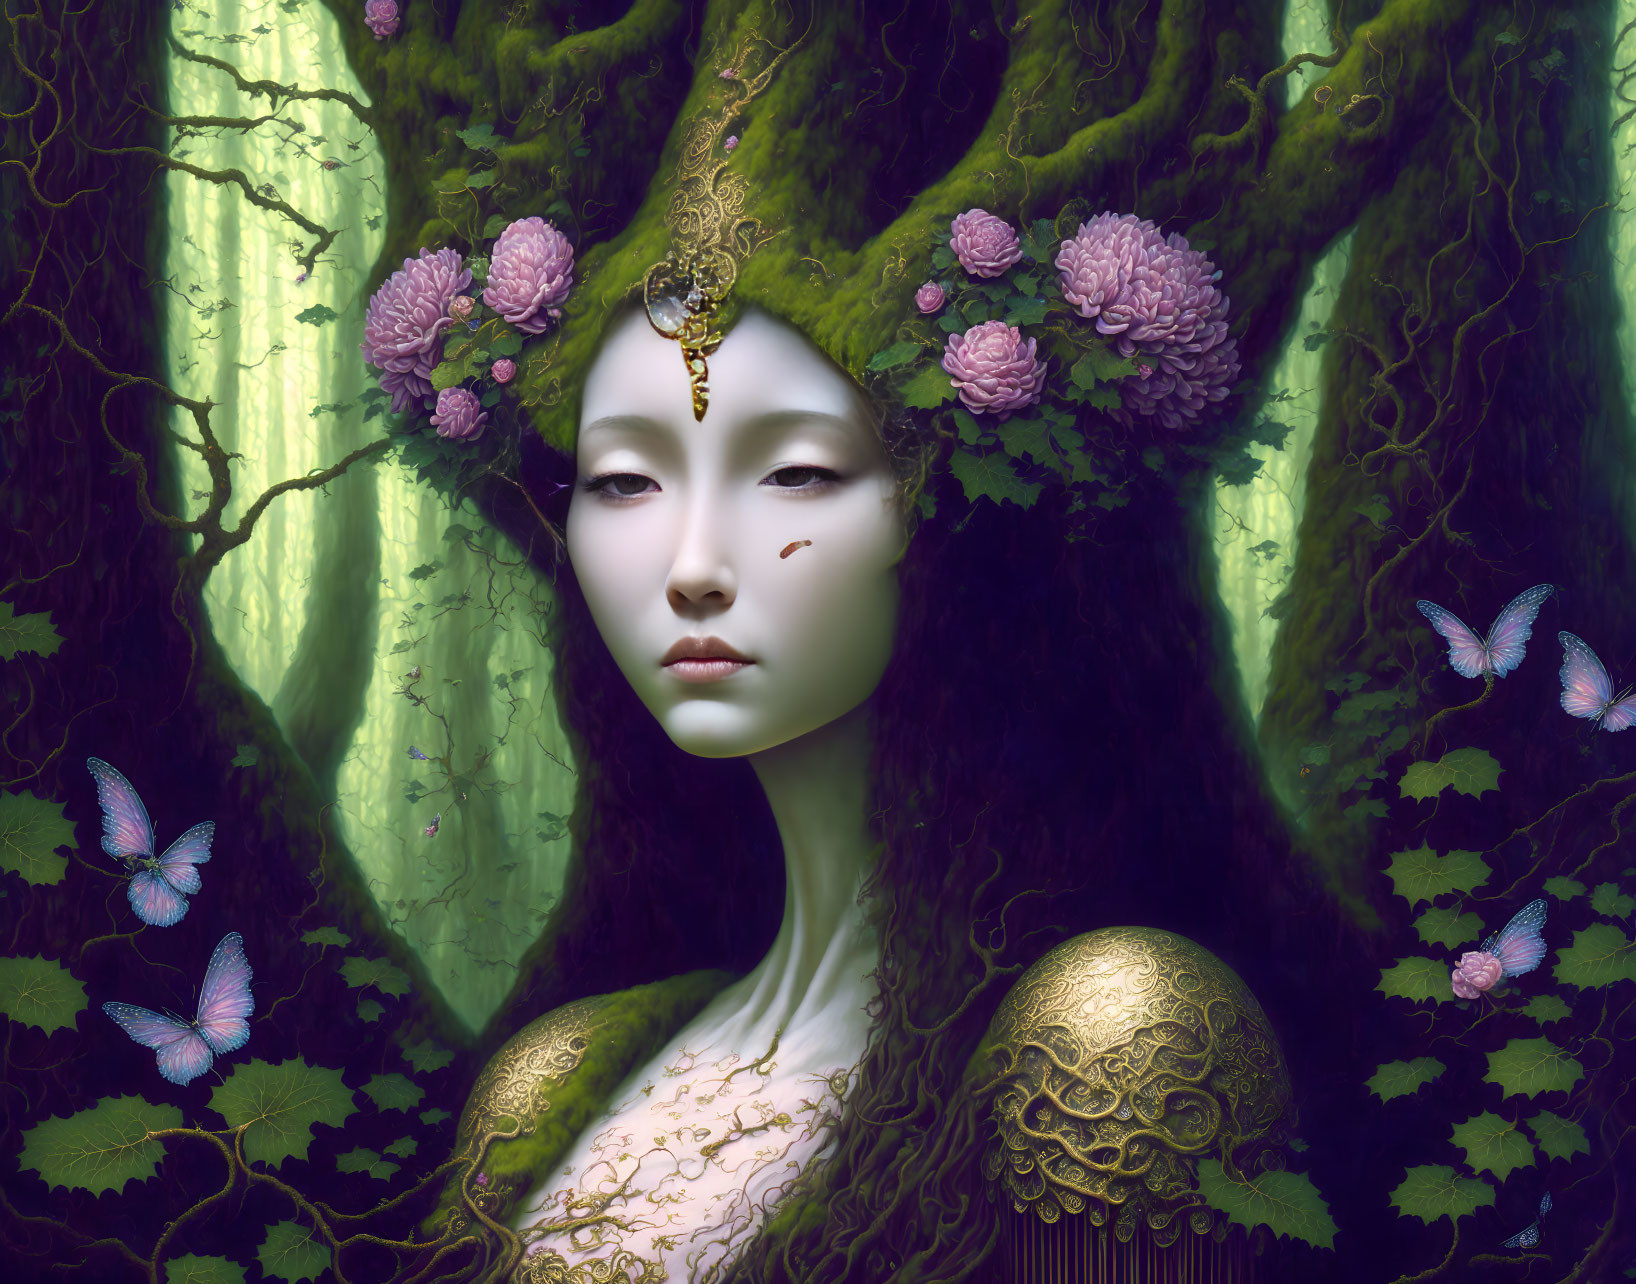 Mystical pale female figure with ornate headpiece in forest setting